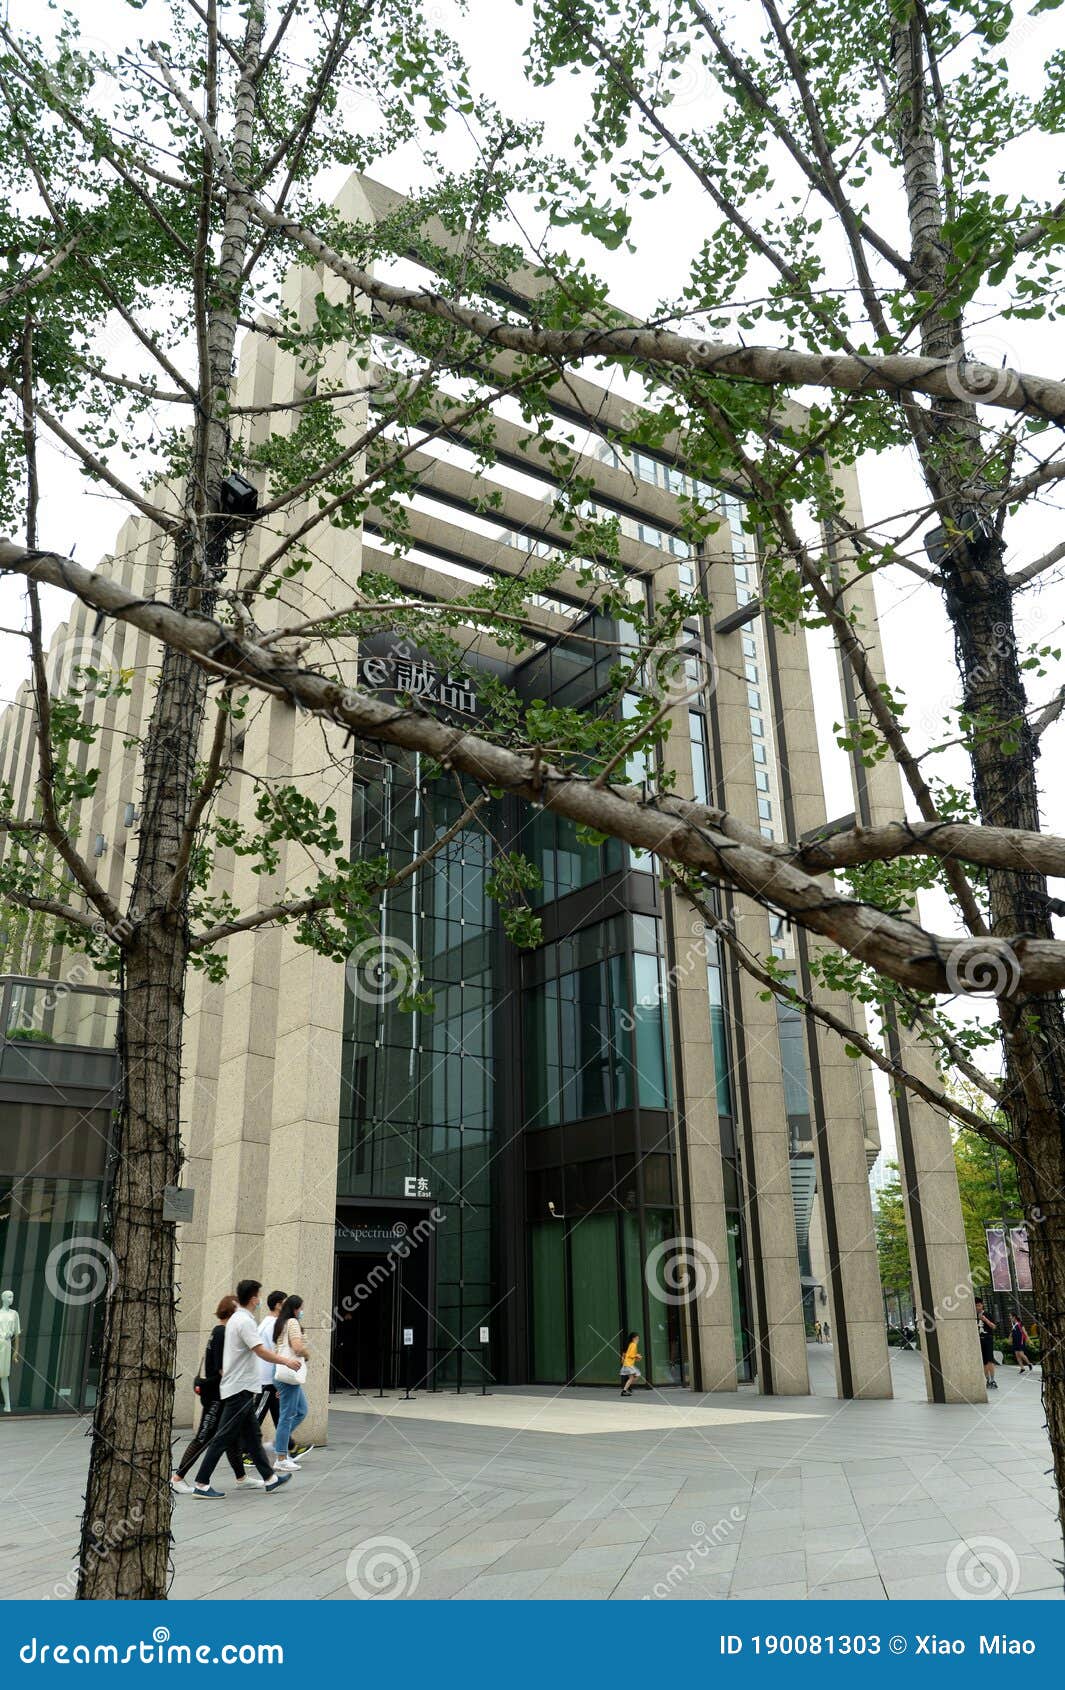 Suzhou Eslite Life Shopping Mall of Suzhou,China Editorial Stock Photo  Image of line, districts: 190081303